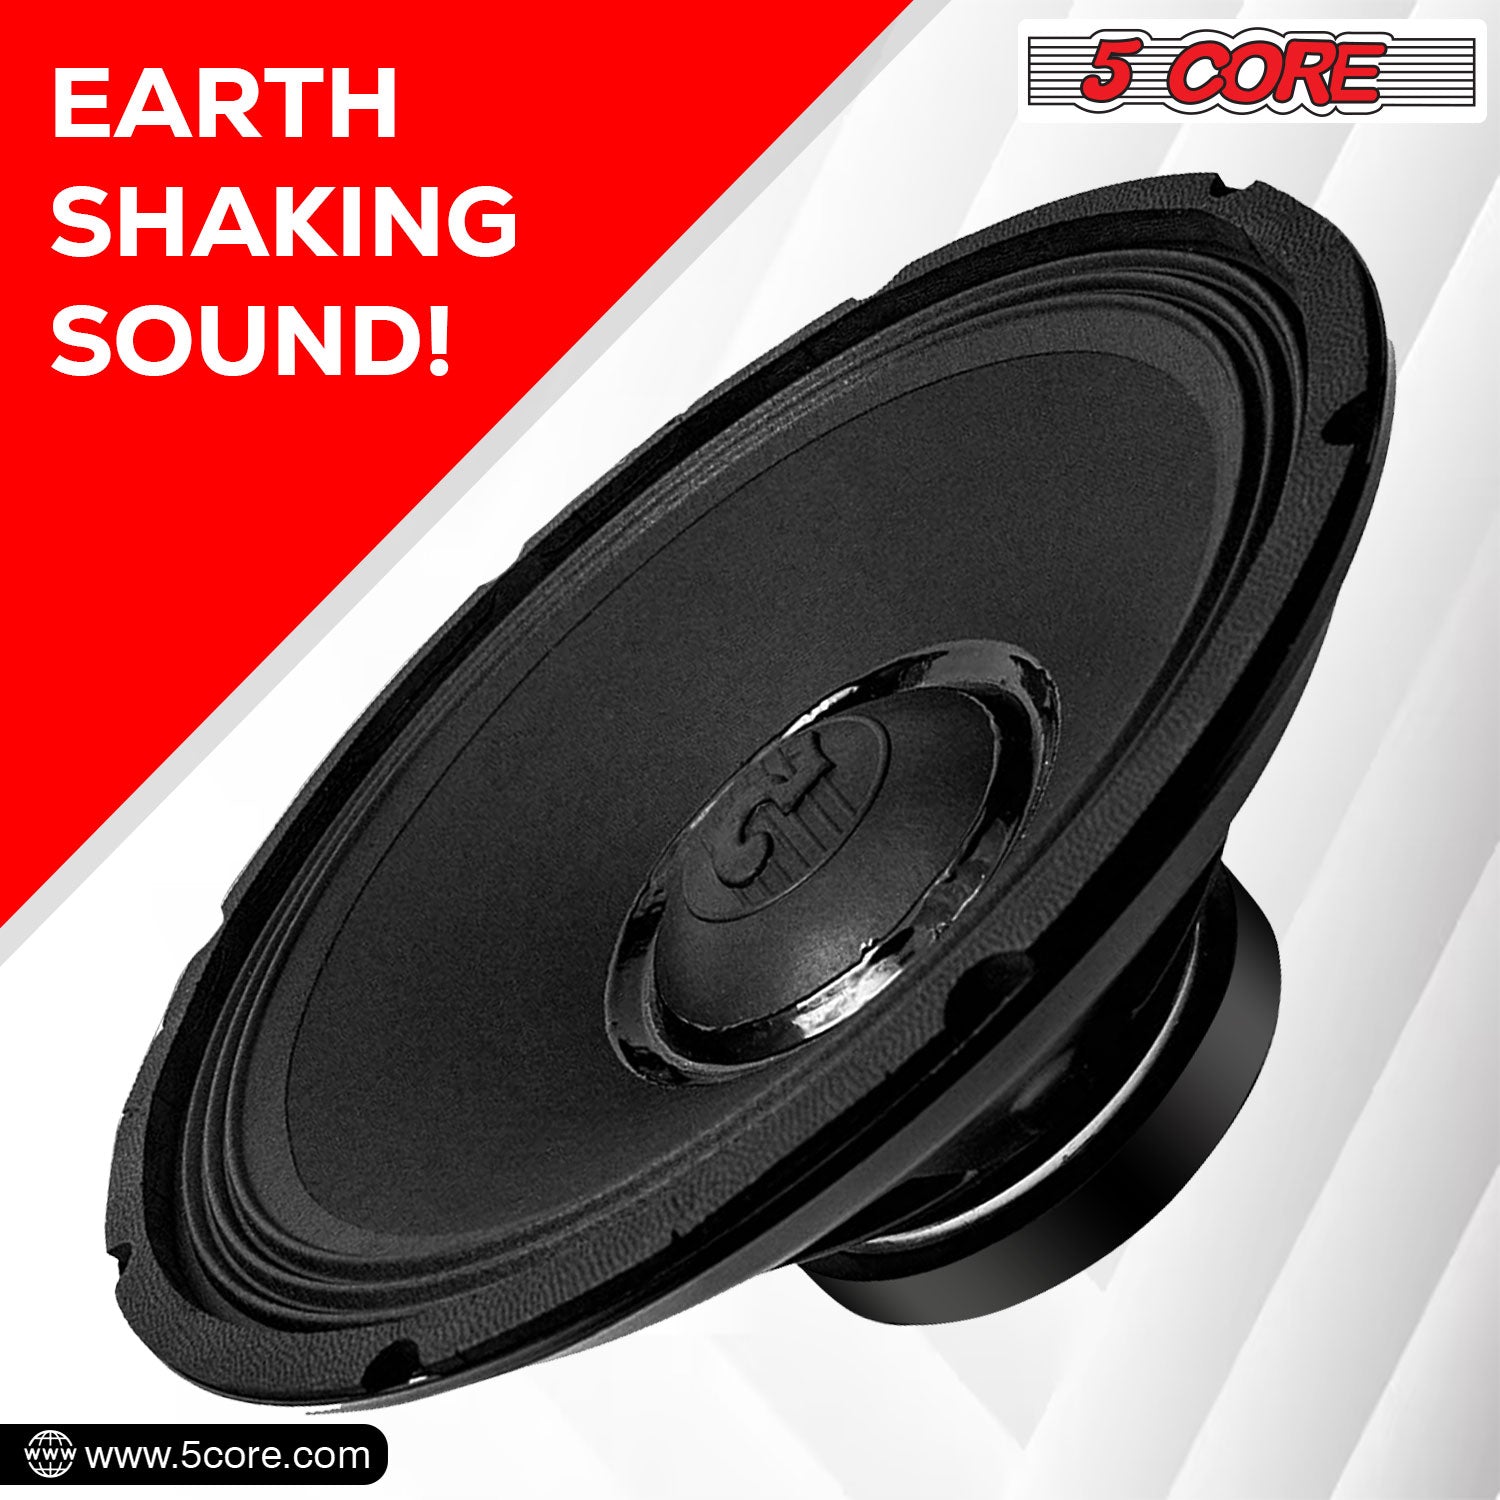 dj speaker can gives earth shaking sound.